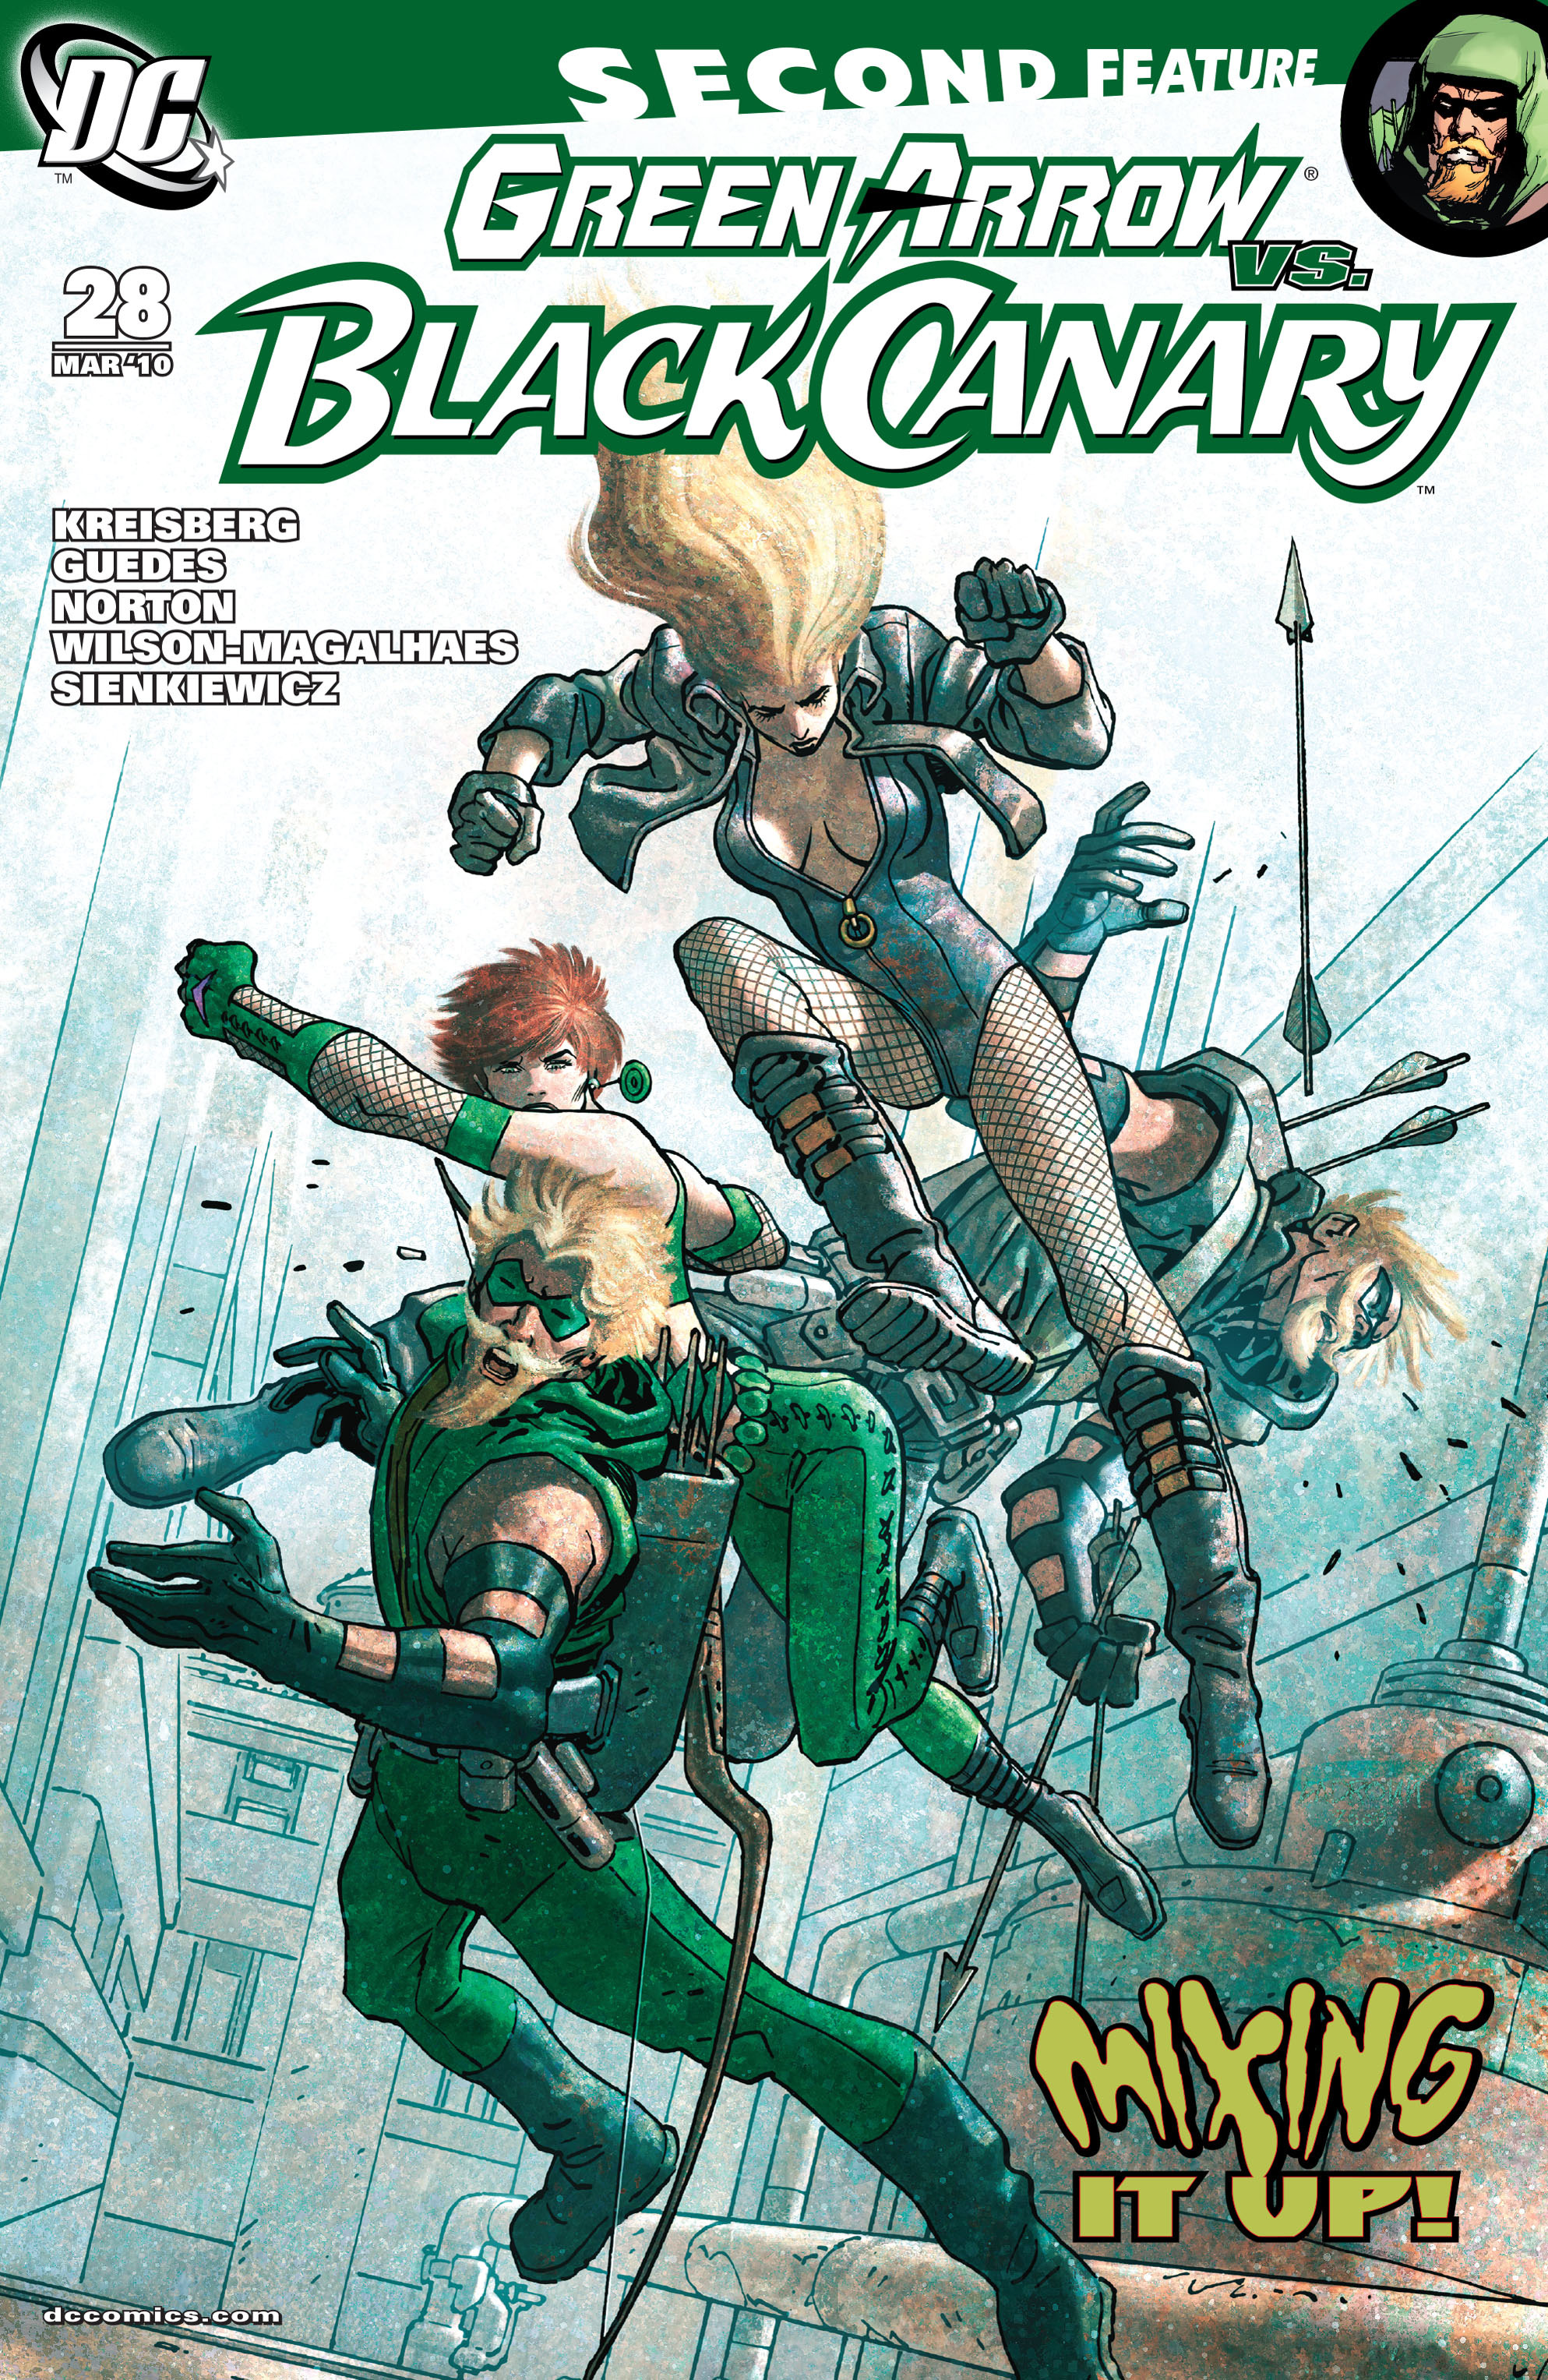 Read online Green Arrow/Black Canary comic -  Issue #28 - 1